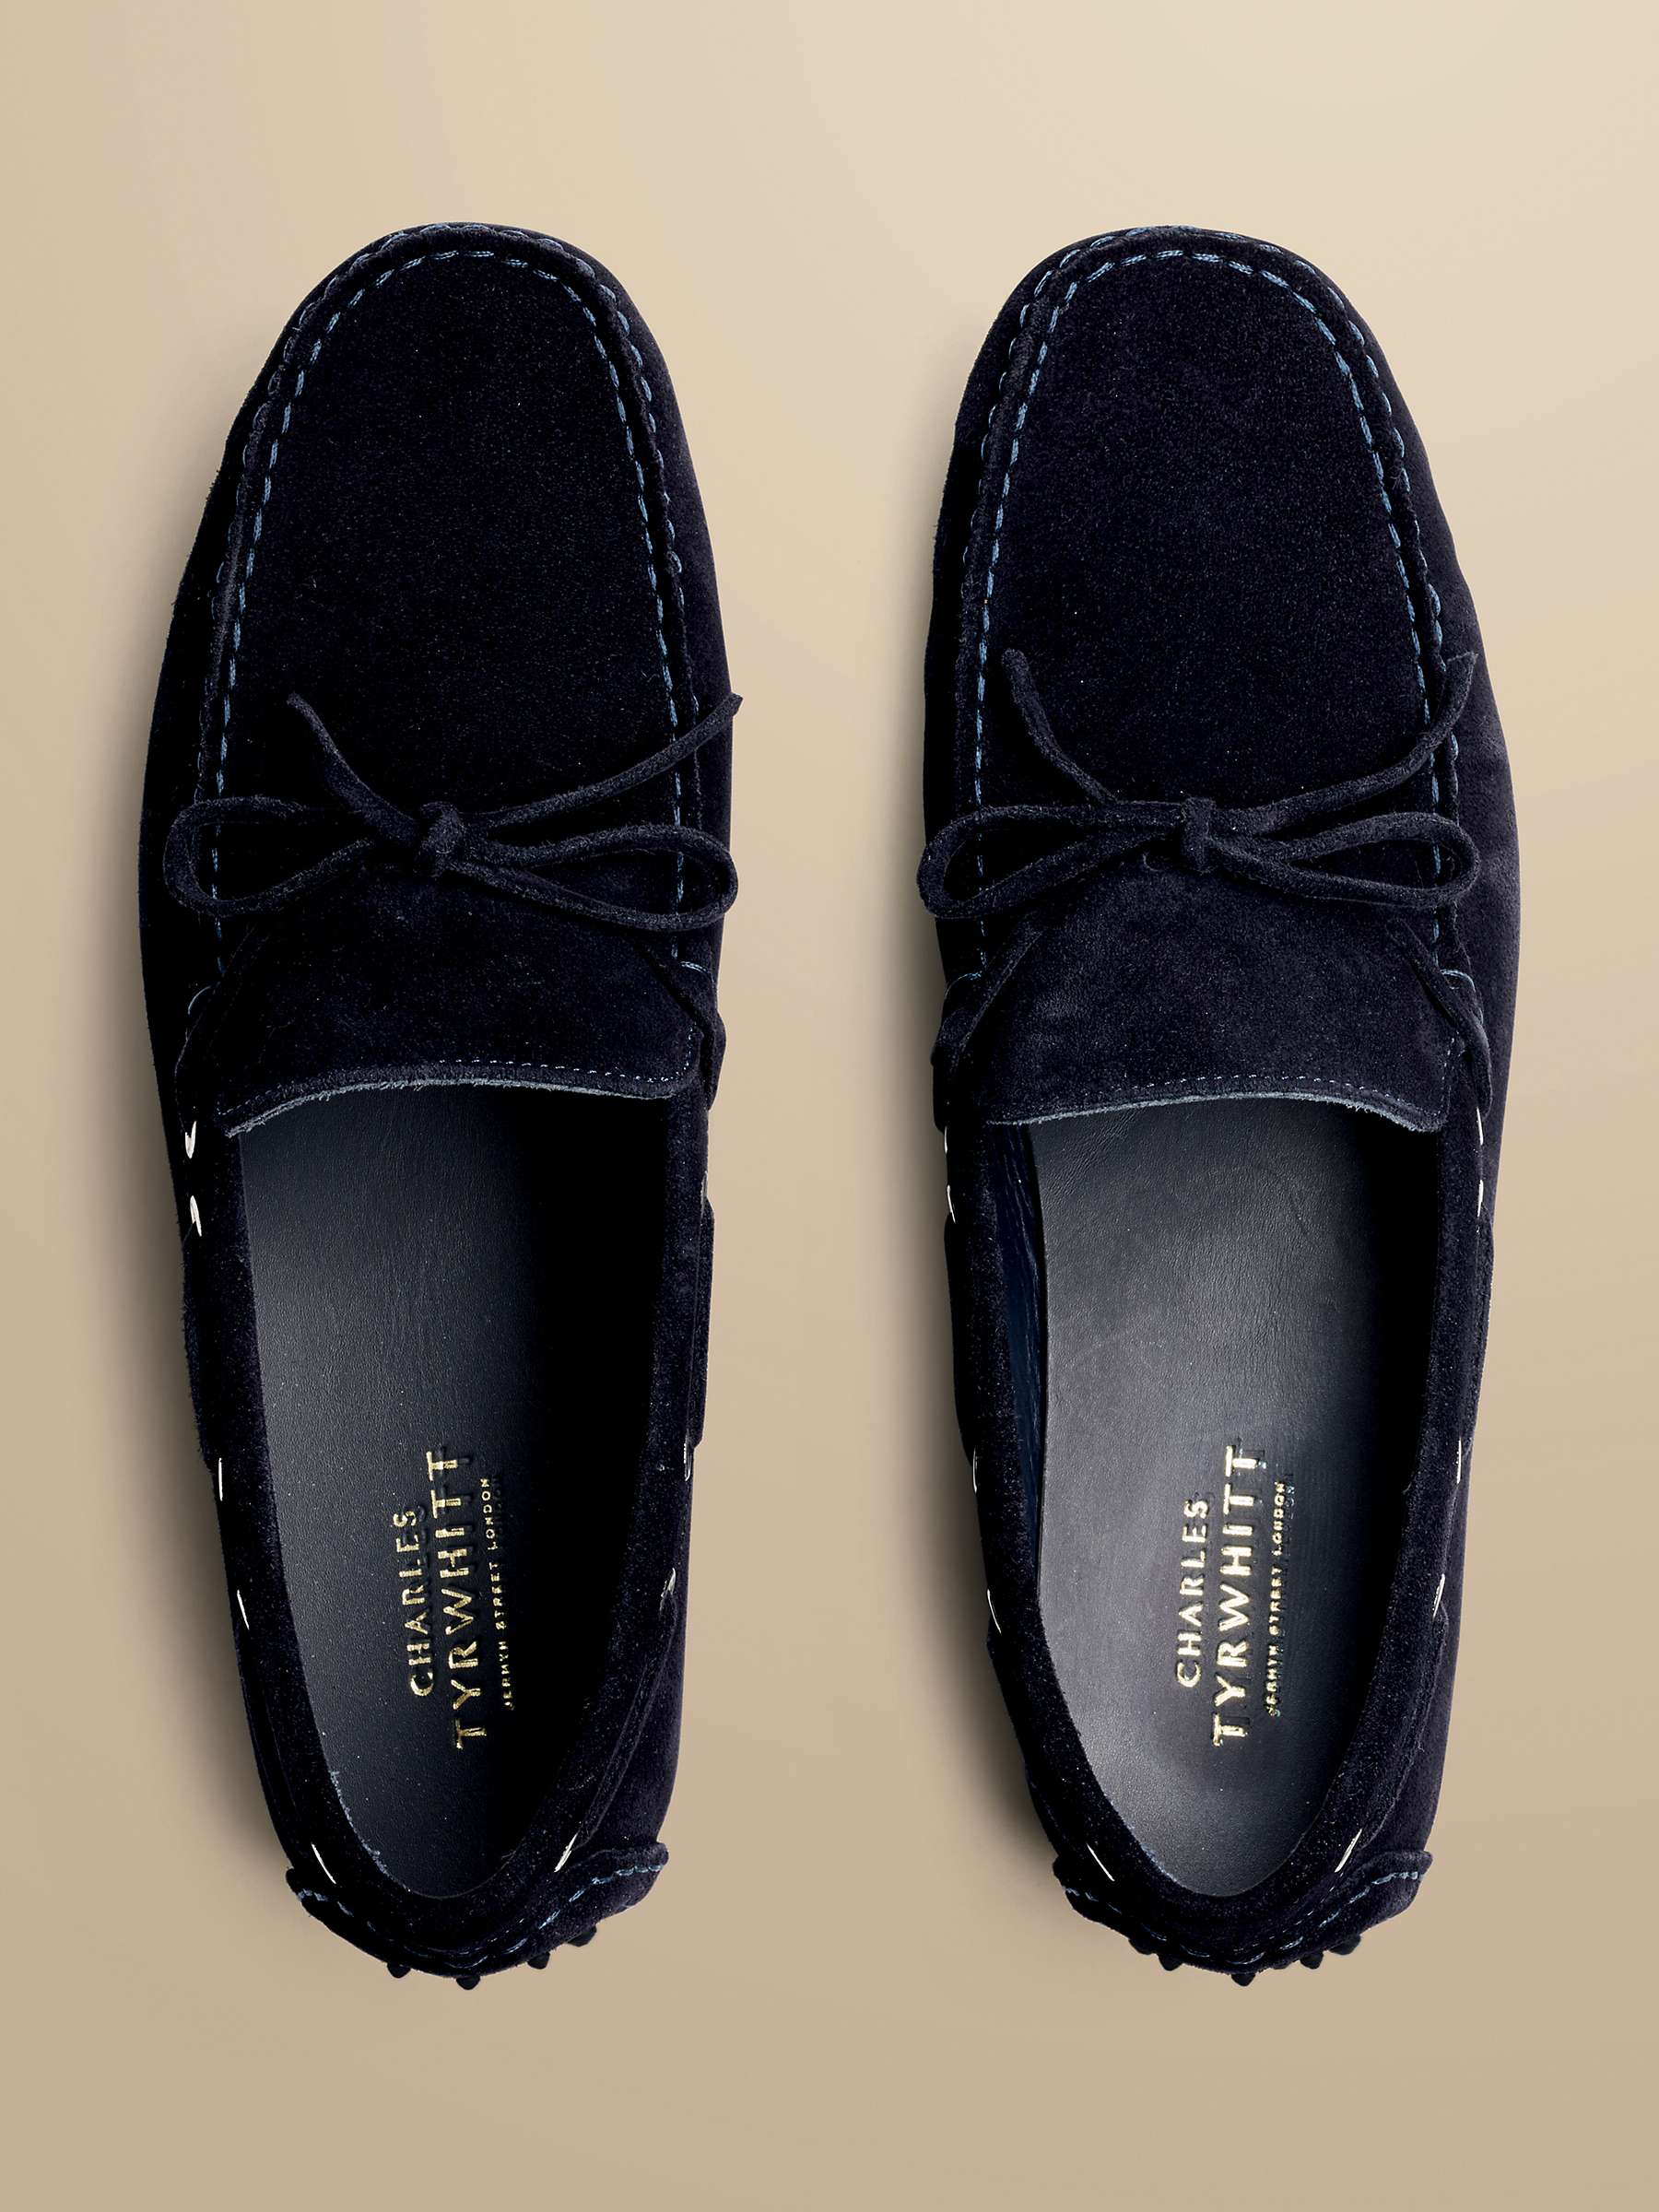 Buy Charles Tyrwhitt Suede Moccasins, Navy Online at johnlewis.com